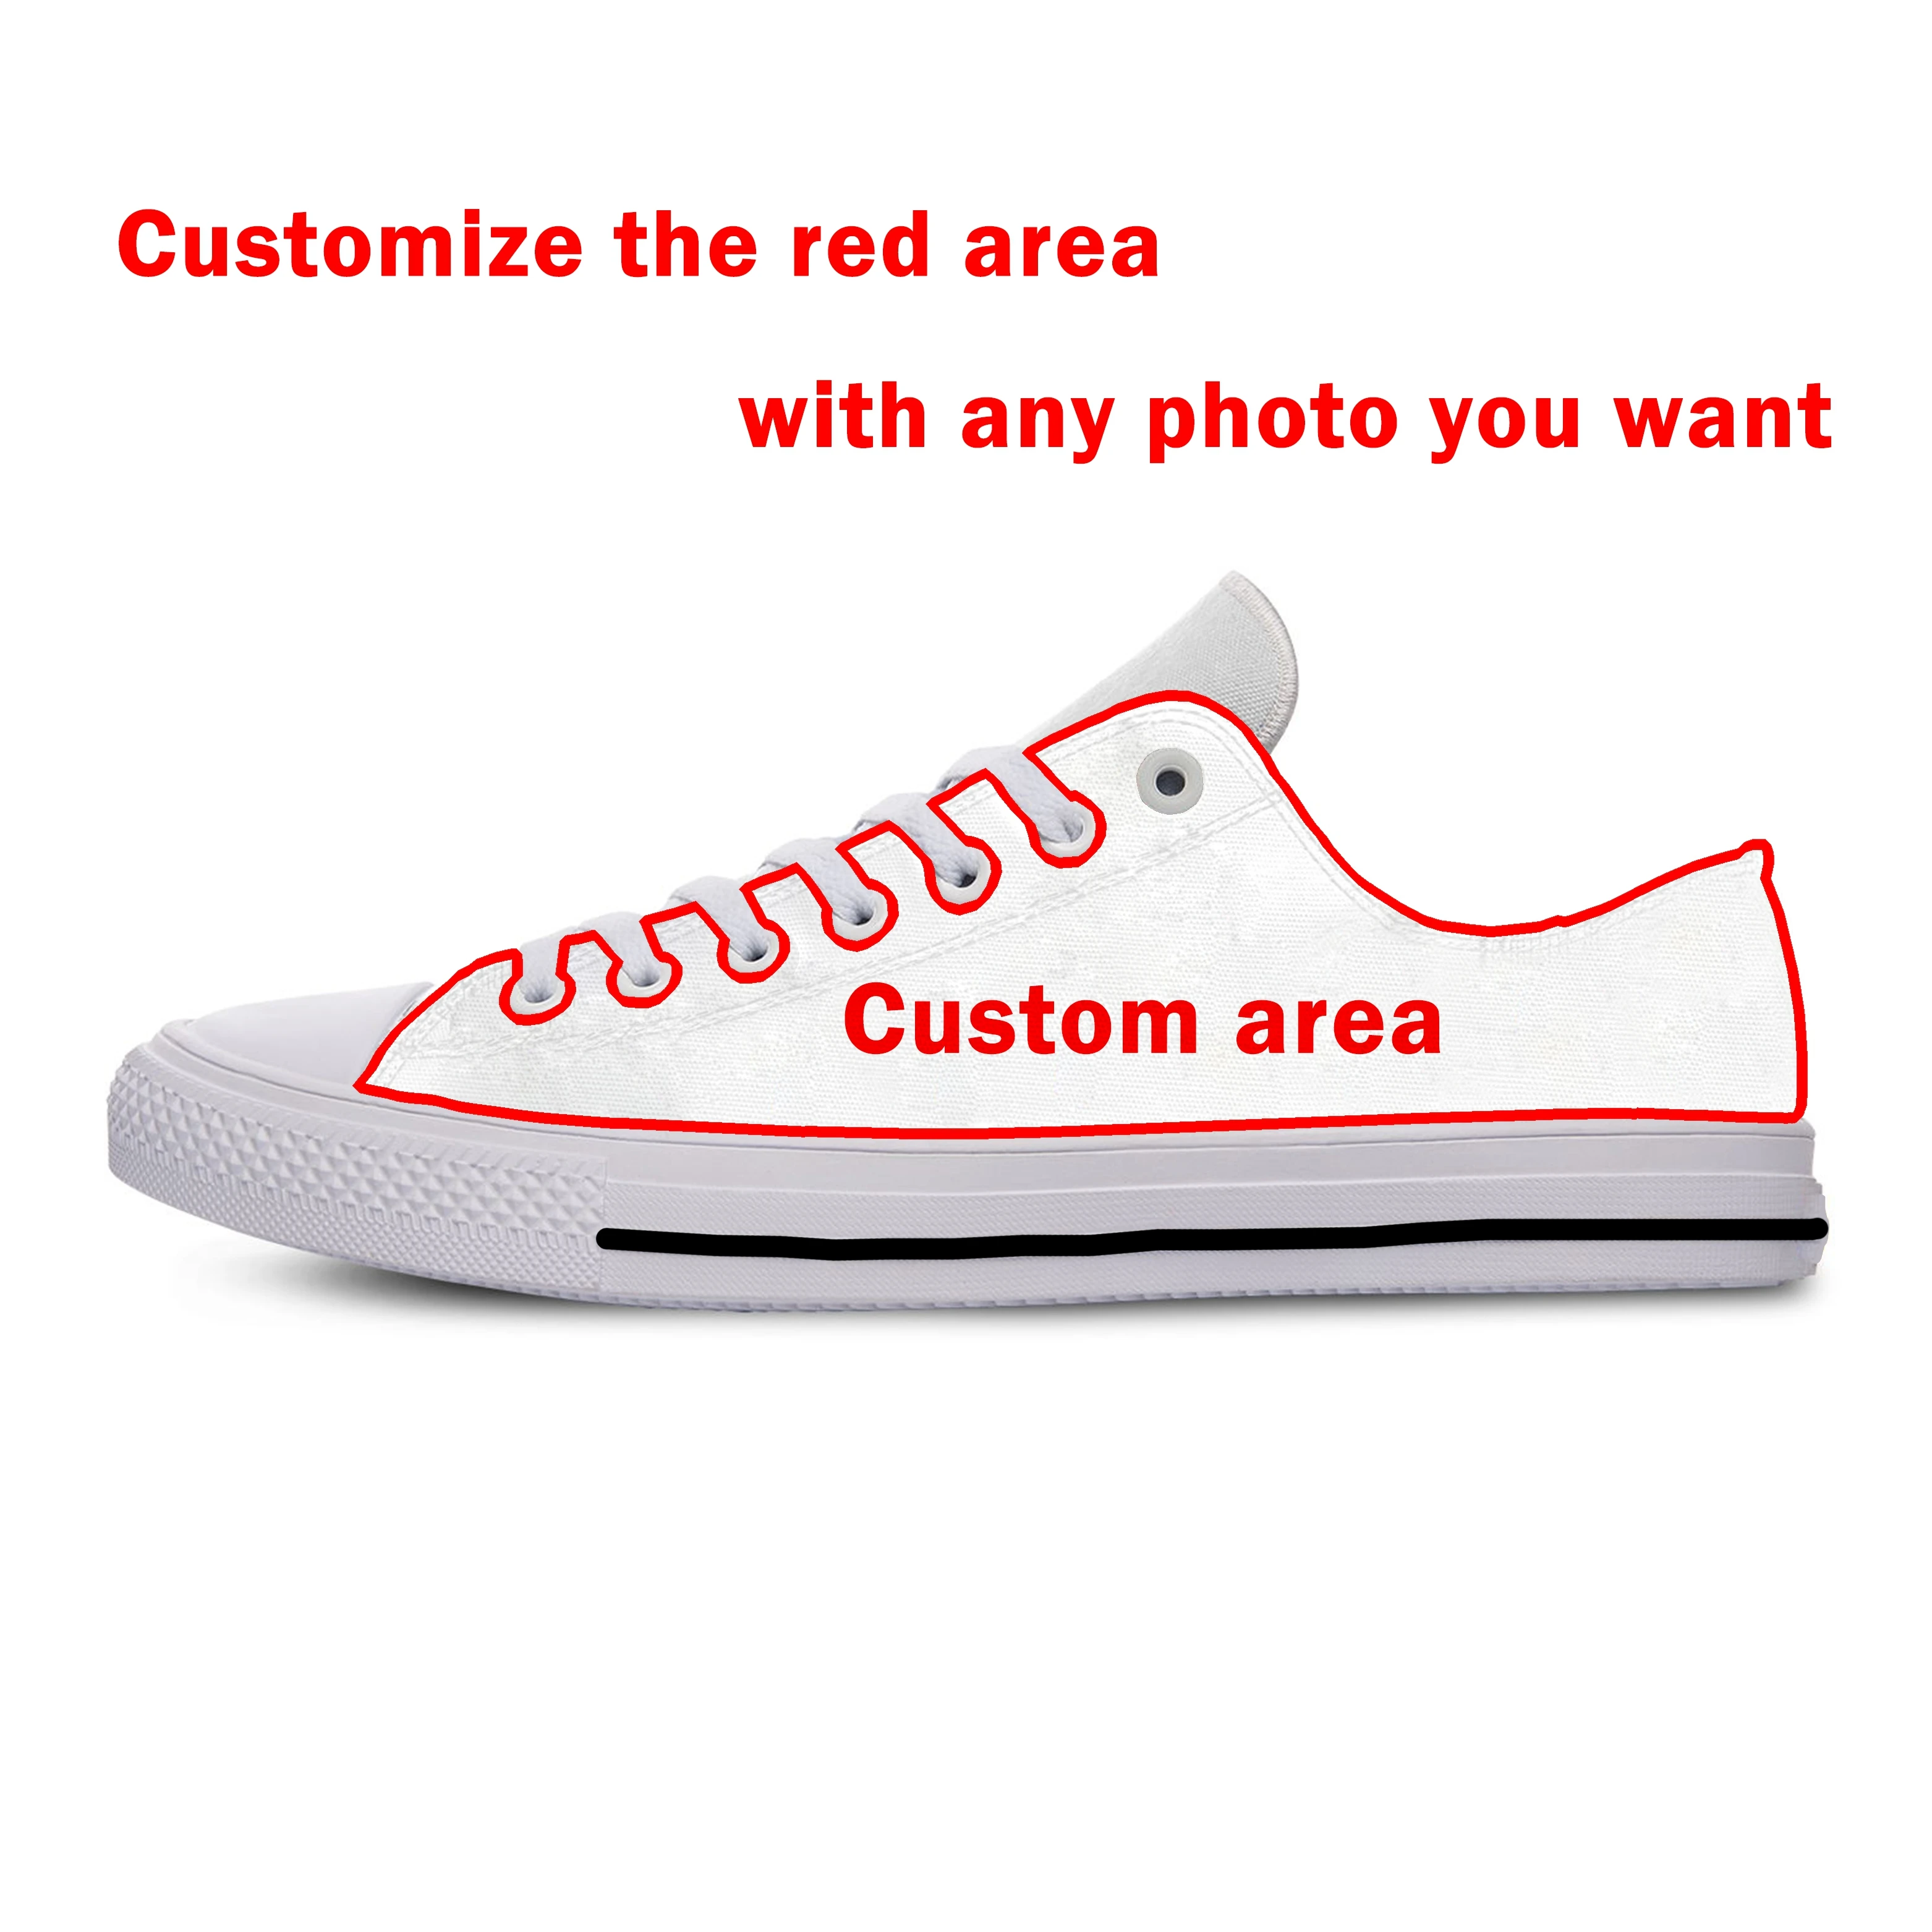 

Killer Klown Rudy 2019 hot fashion 3D Sneakers for men/women high quality 3D printing Killer Klown Rudy casual shoes